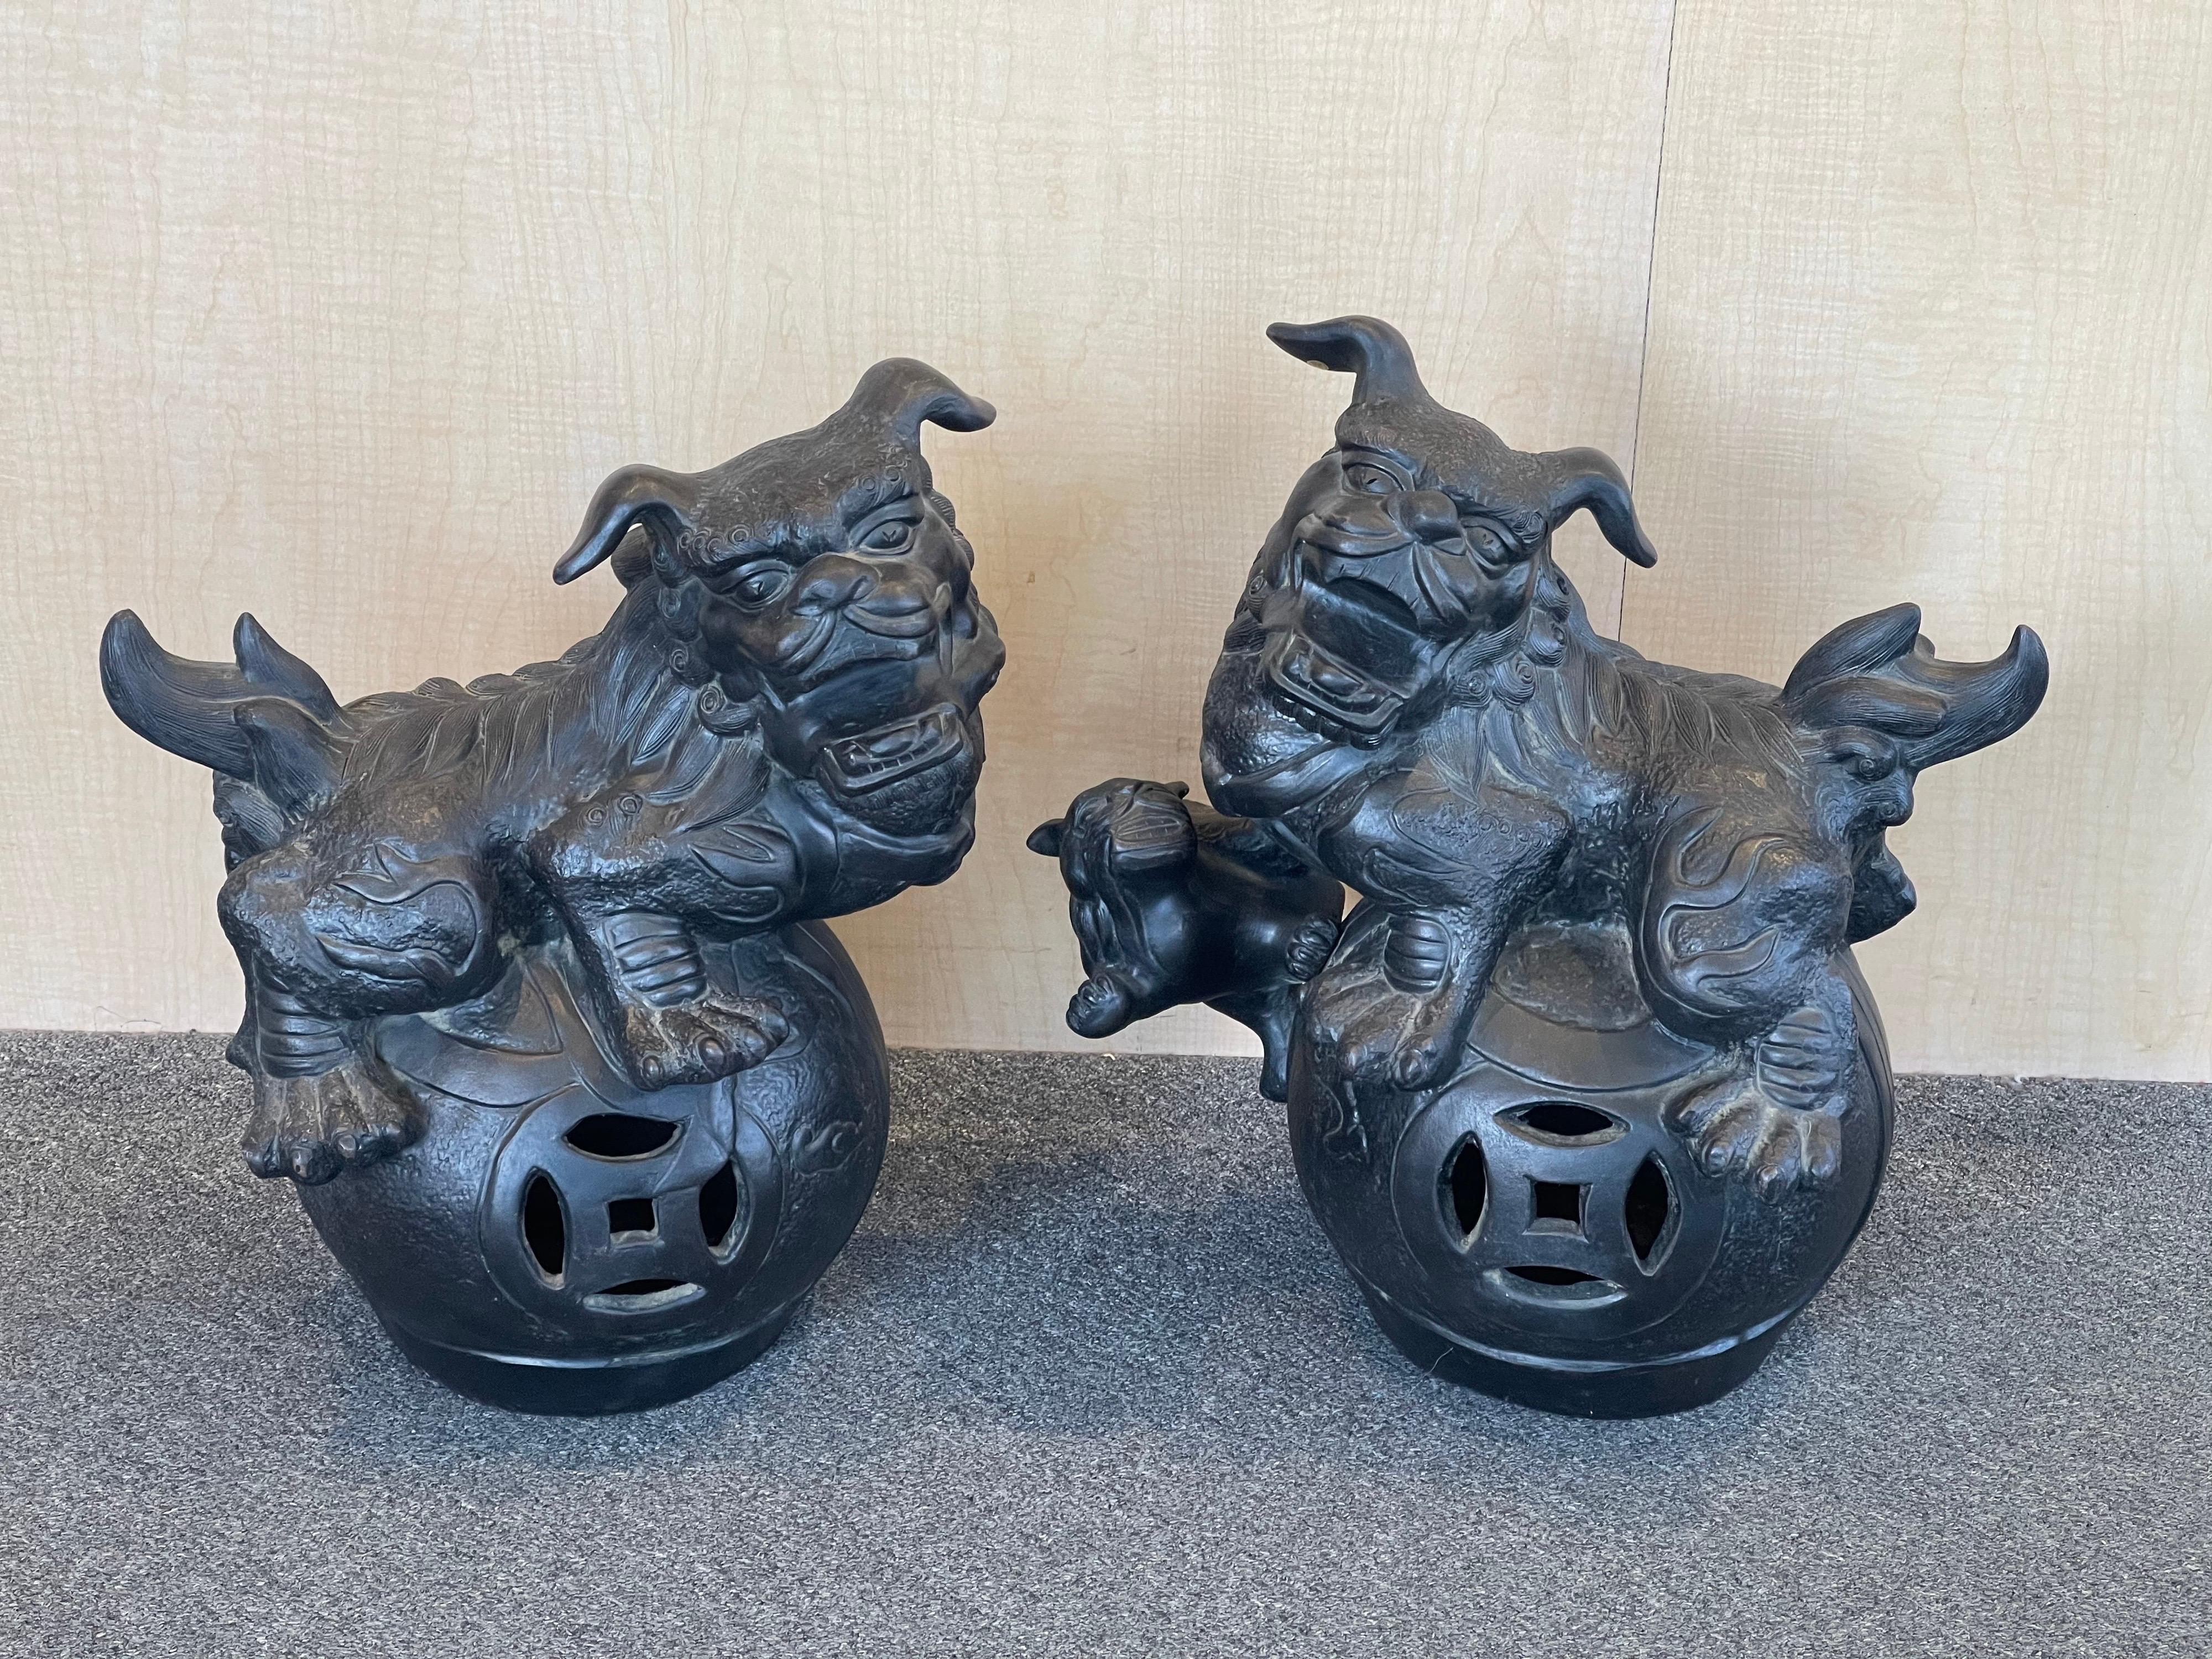 Incredible, massive pair of ebonized pottery Chinese foo dogs, circa 1950s. This unusual pair are finely crafted with amazing detail sitting on xiu qiu play balls. #1873

Overall condition is excellent with great color and patina; each dog